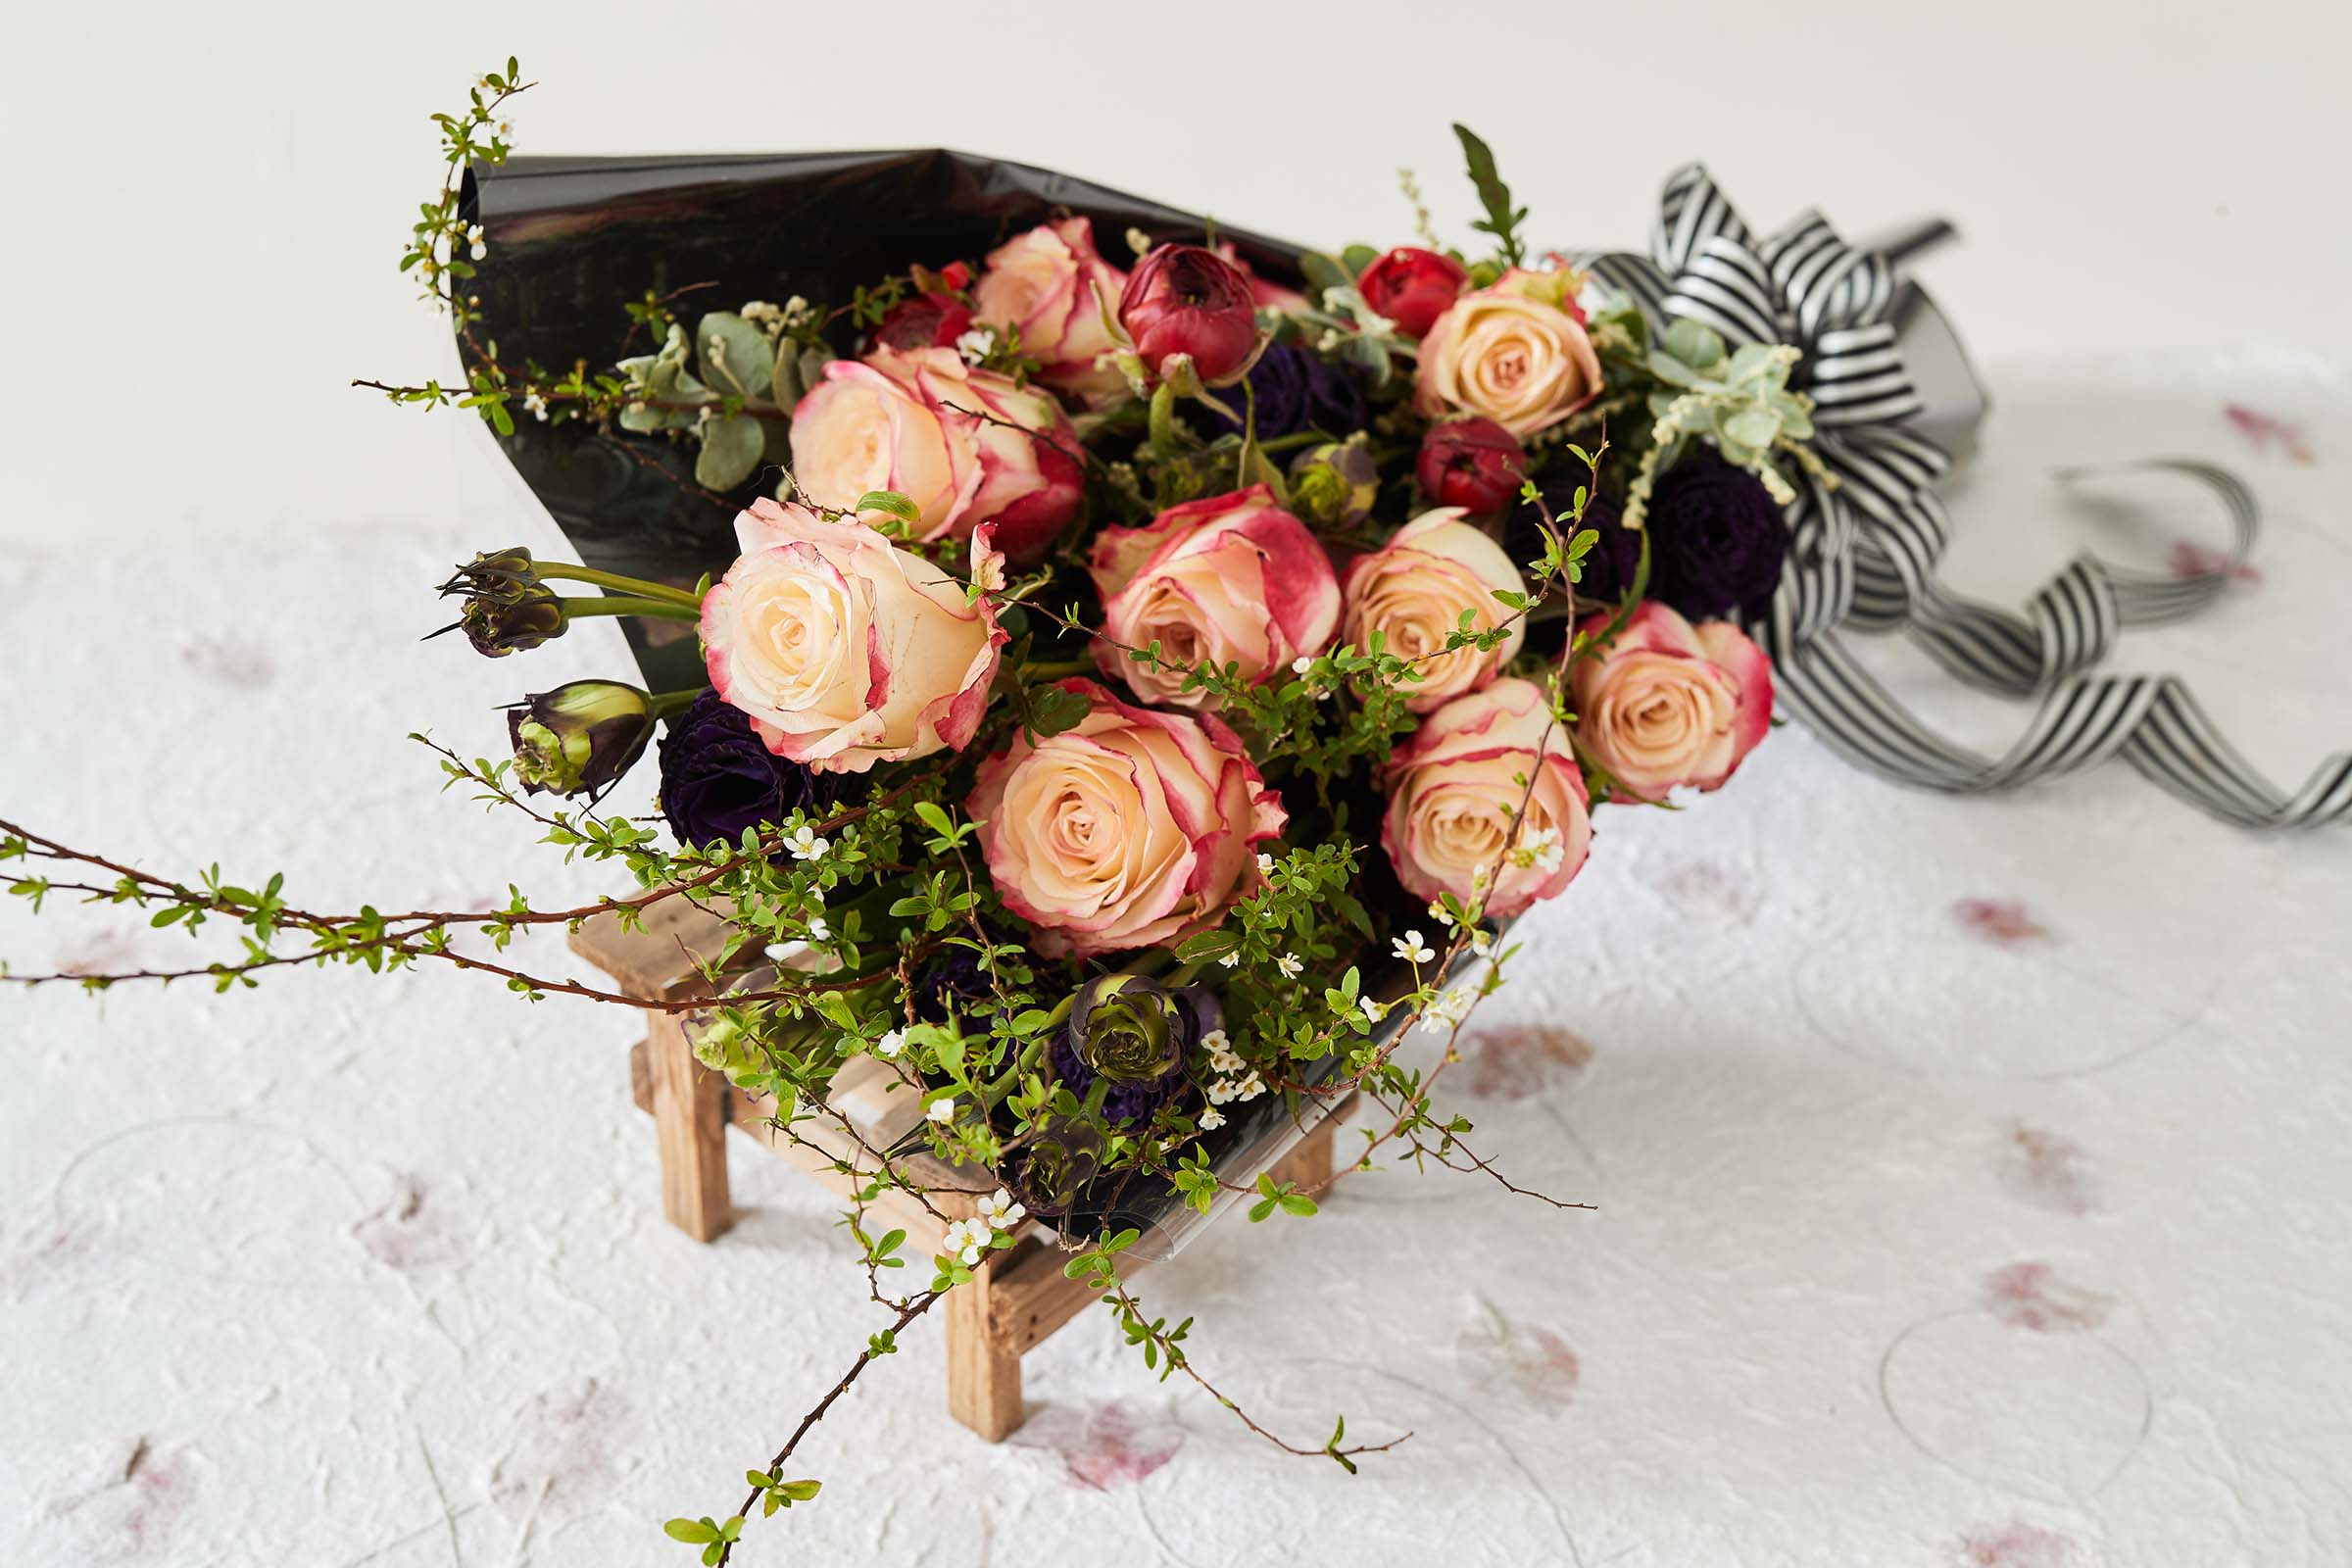 Online Flower Shopping Tips: 5 Things You Need to Ask Your Florist